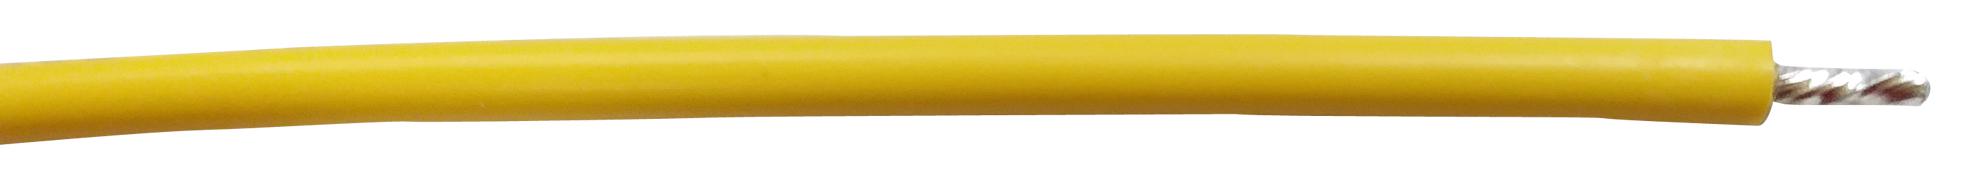 PP002346 HOOK-UP WIRE, 30AWG, YELLOW, 305M, 300V PRO POWER